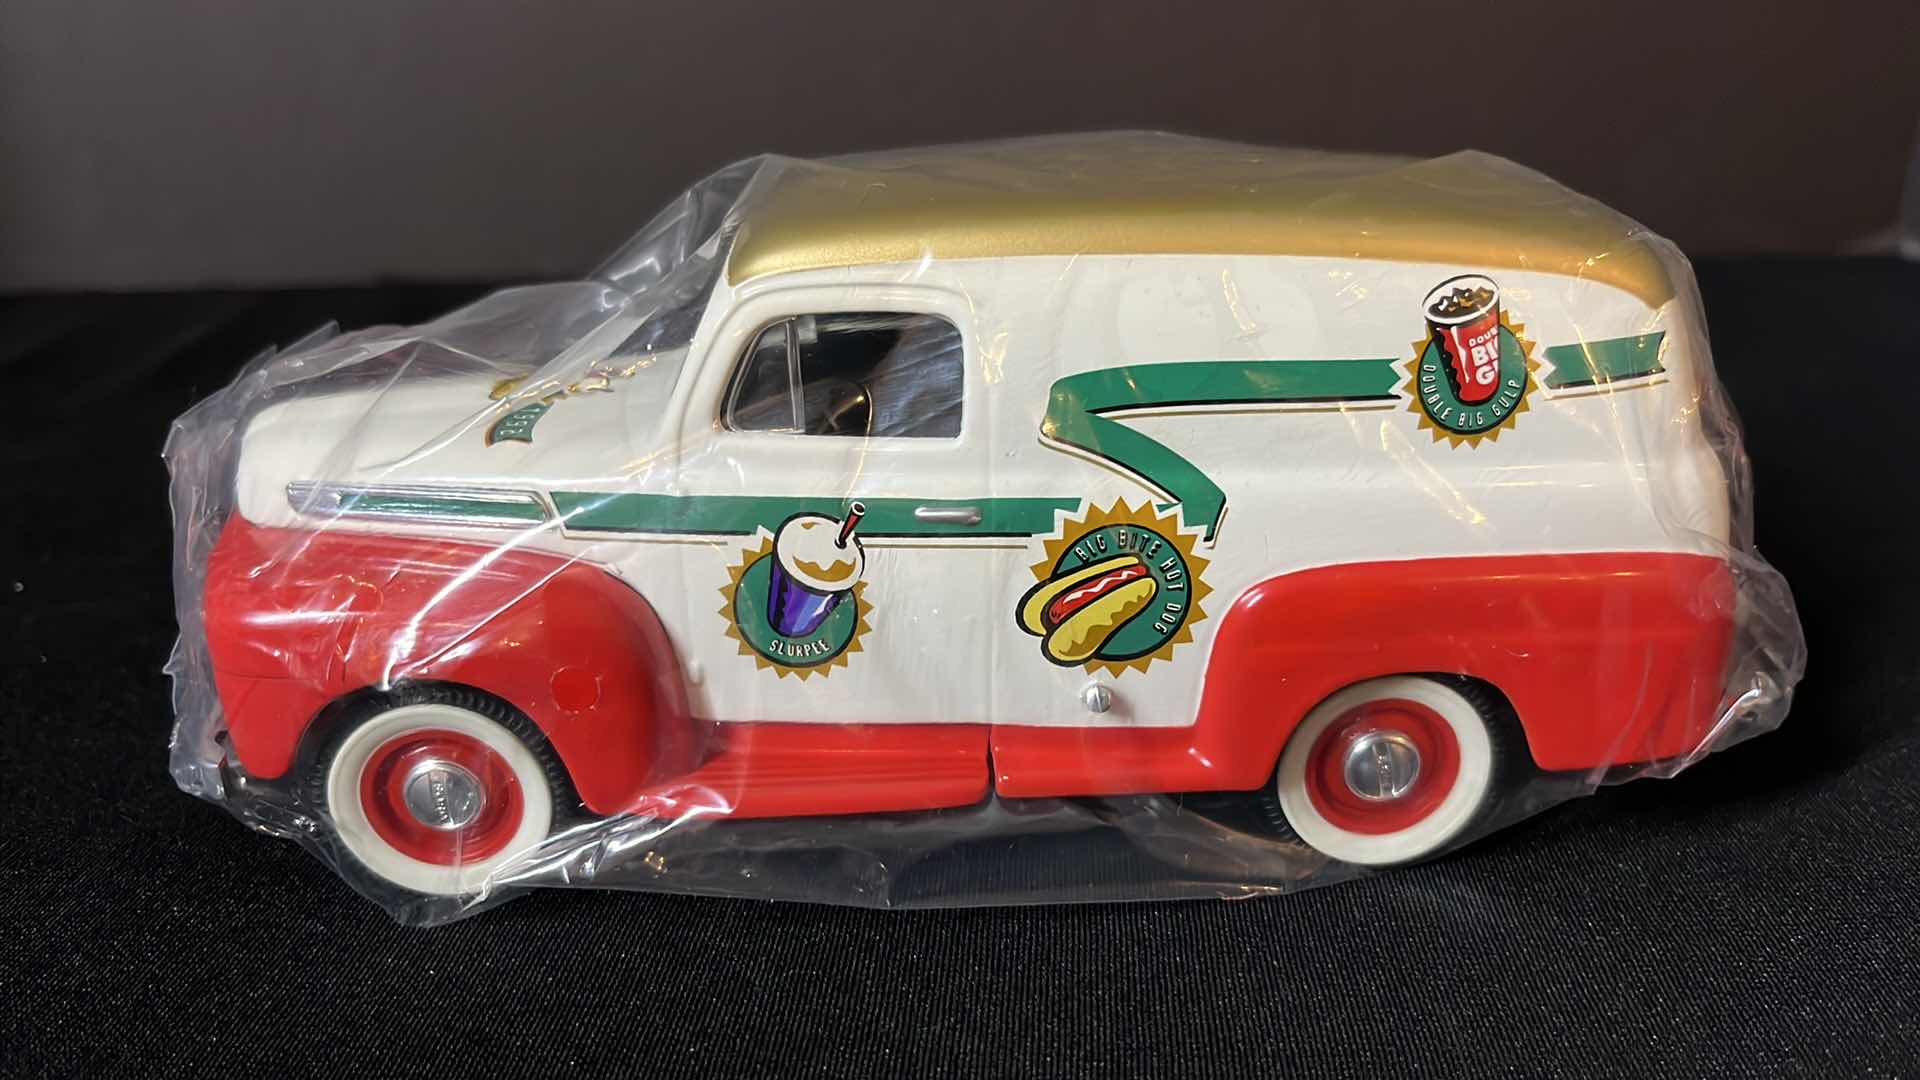 Photo 2 of VINTAGE FORD MOTOR COMPANY 7 ELEVEN 1948 FORD PANEL VAN COIN BANK (STOCK #68036)